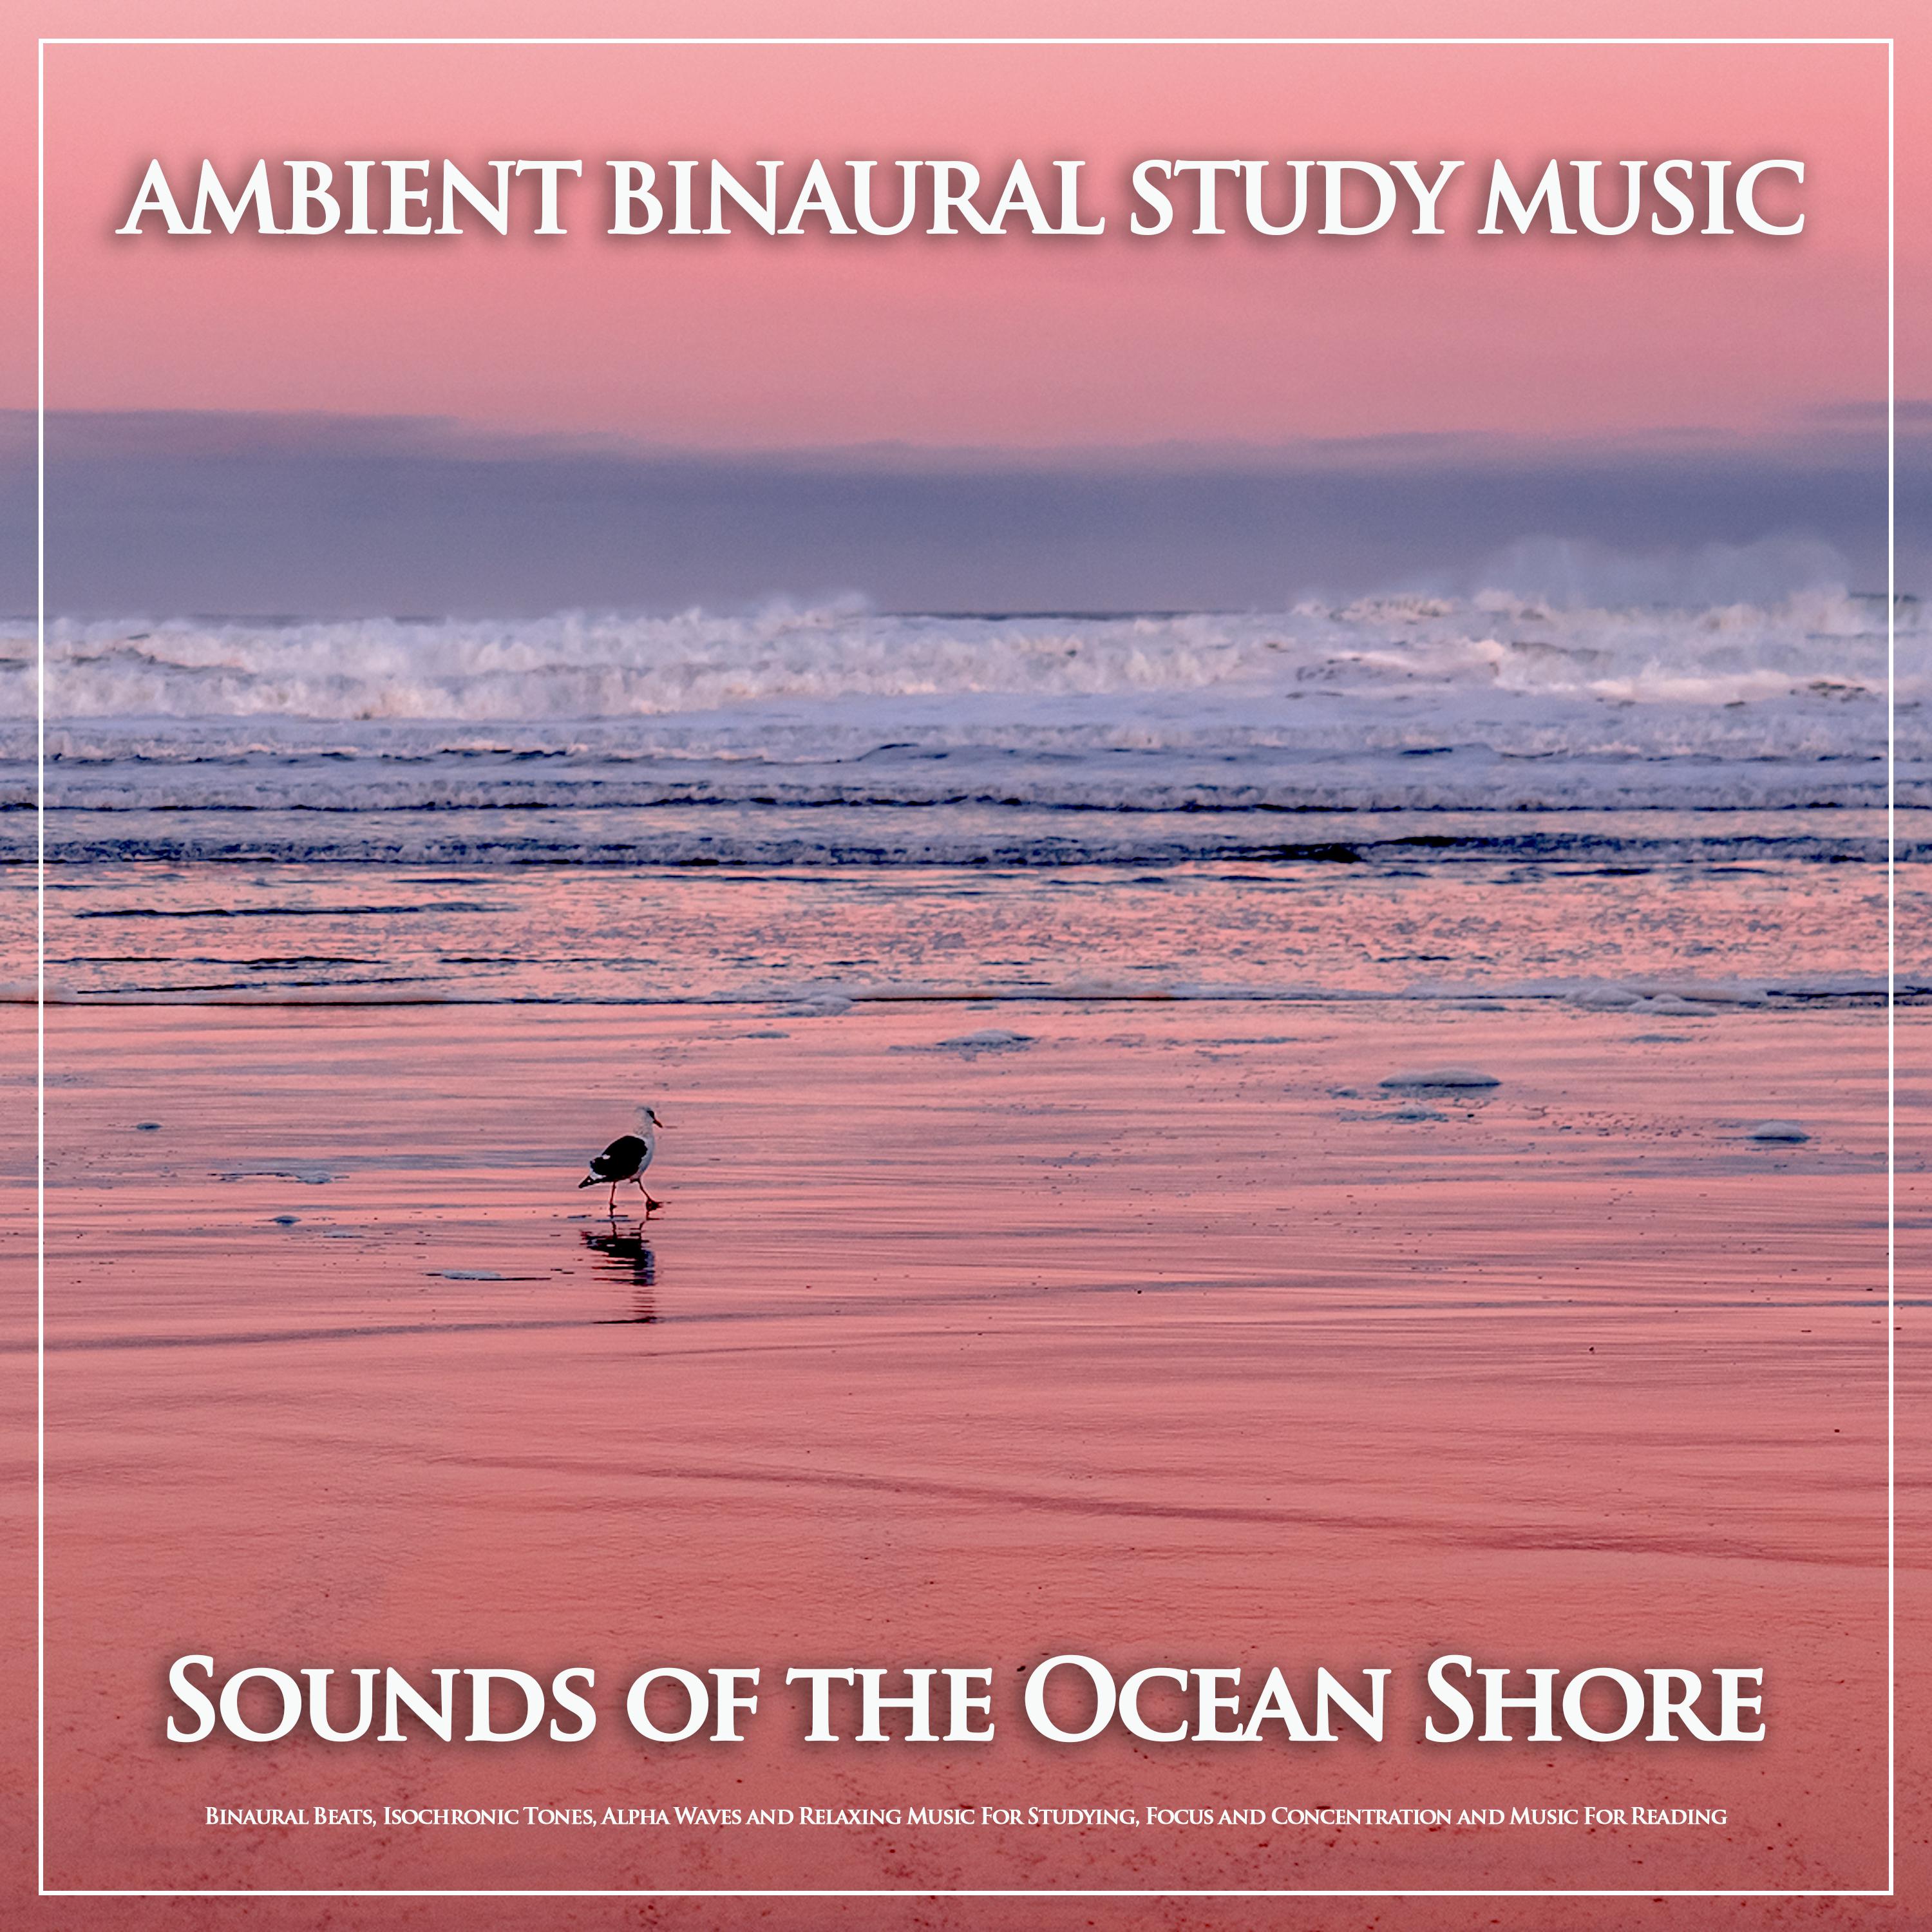 Music For Studying and Sounds of the Ocean